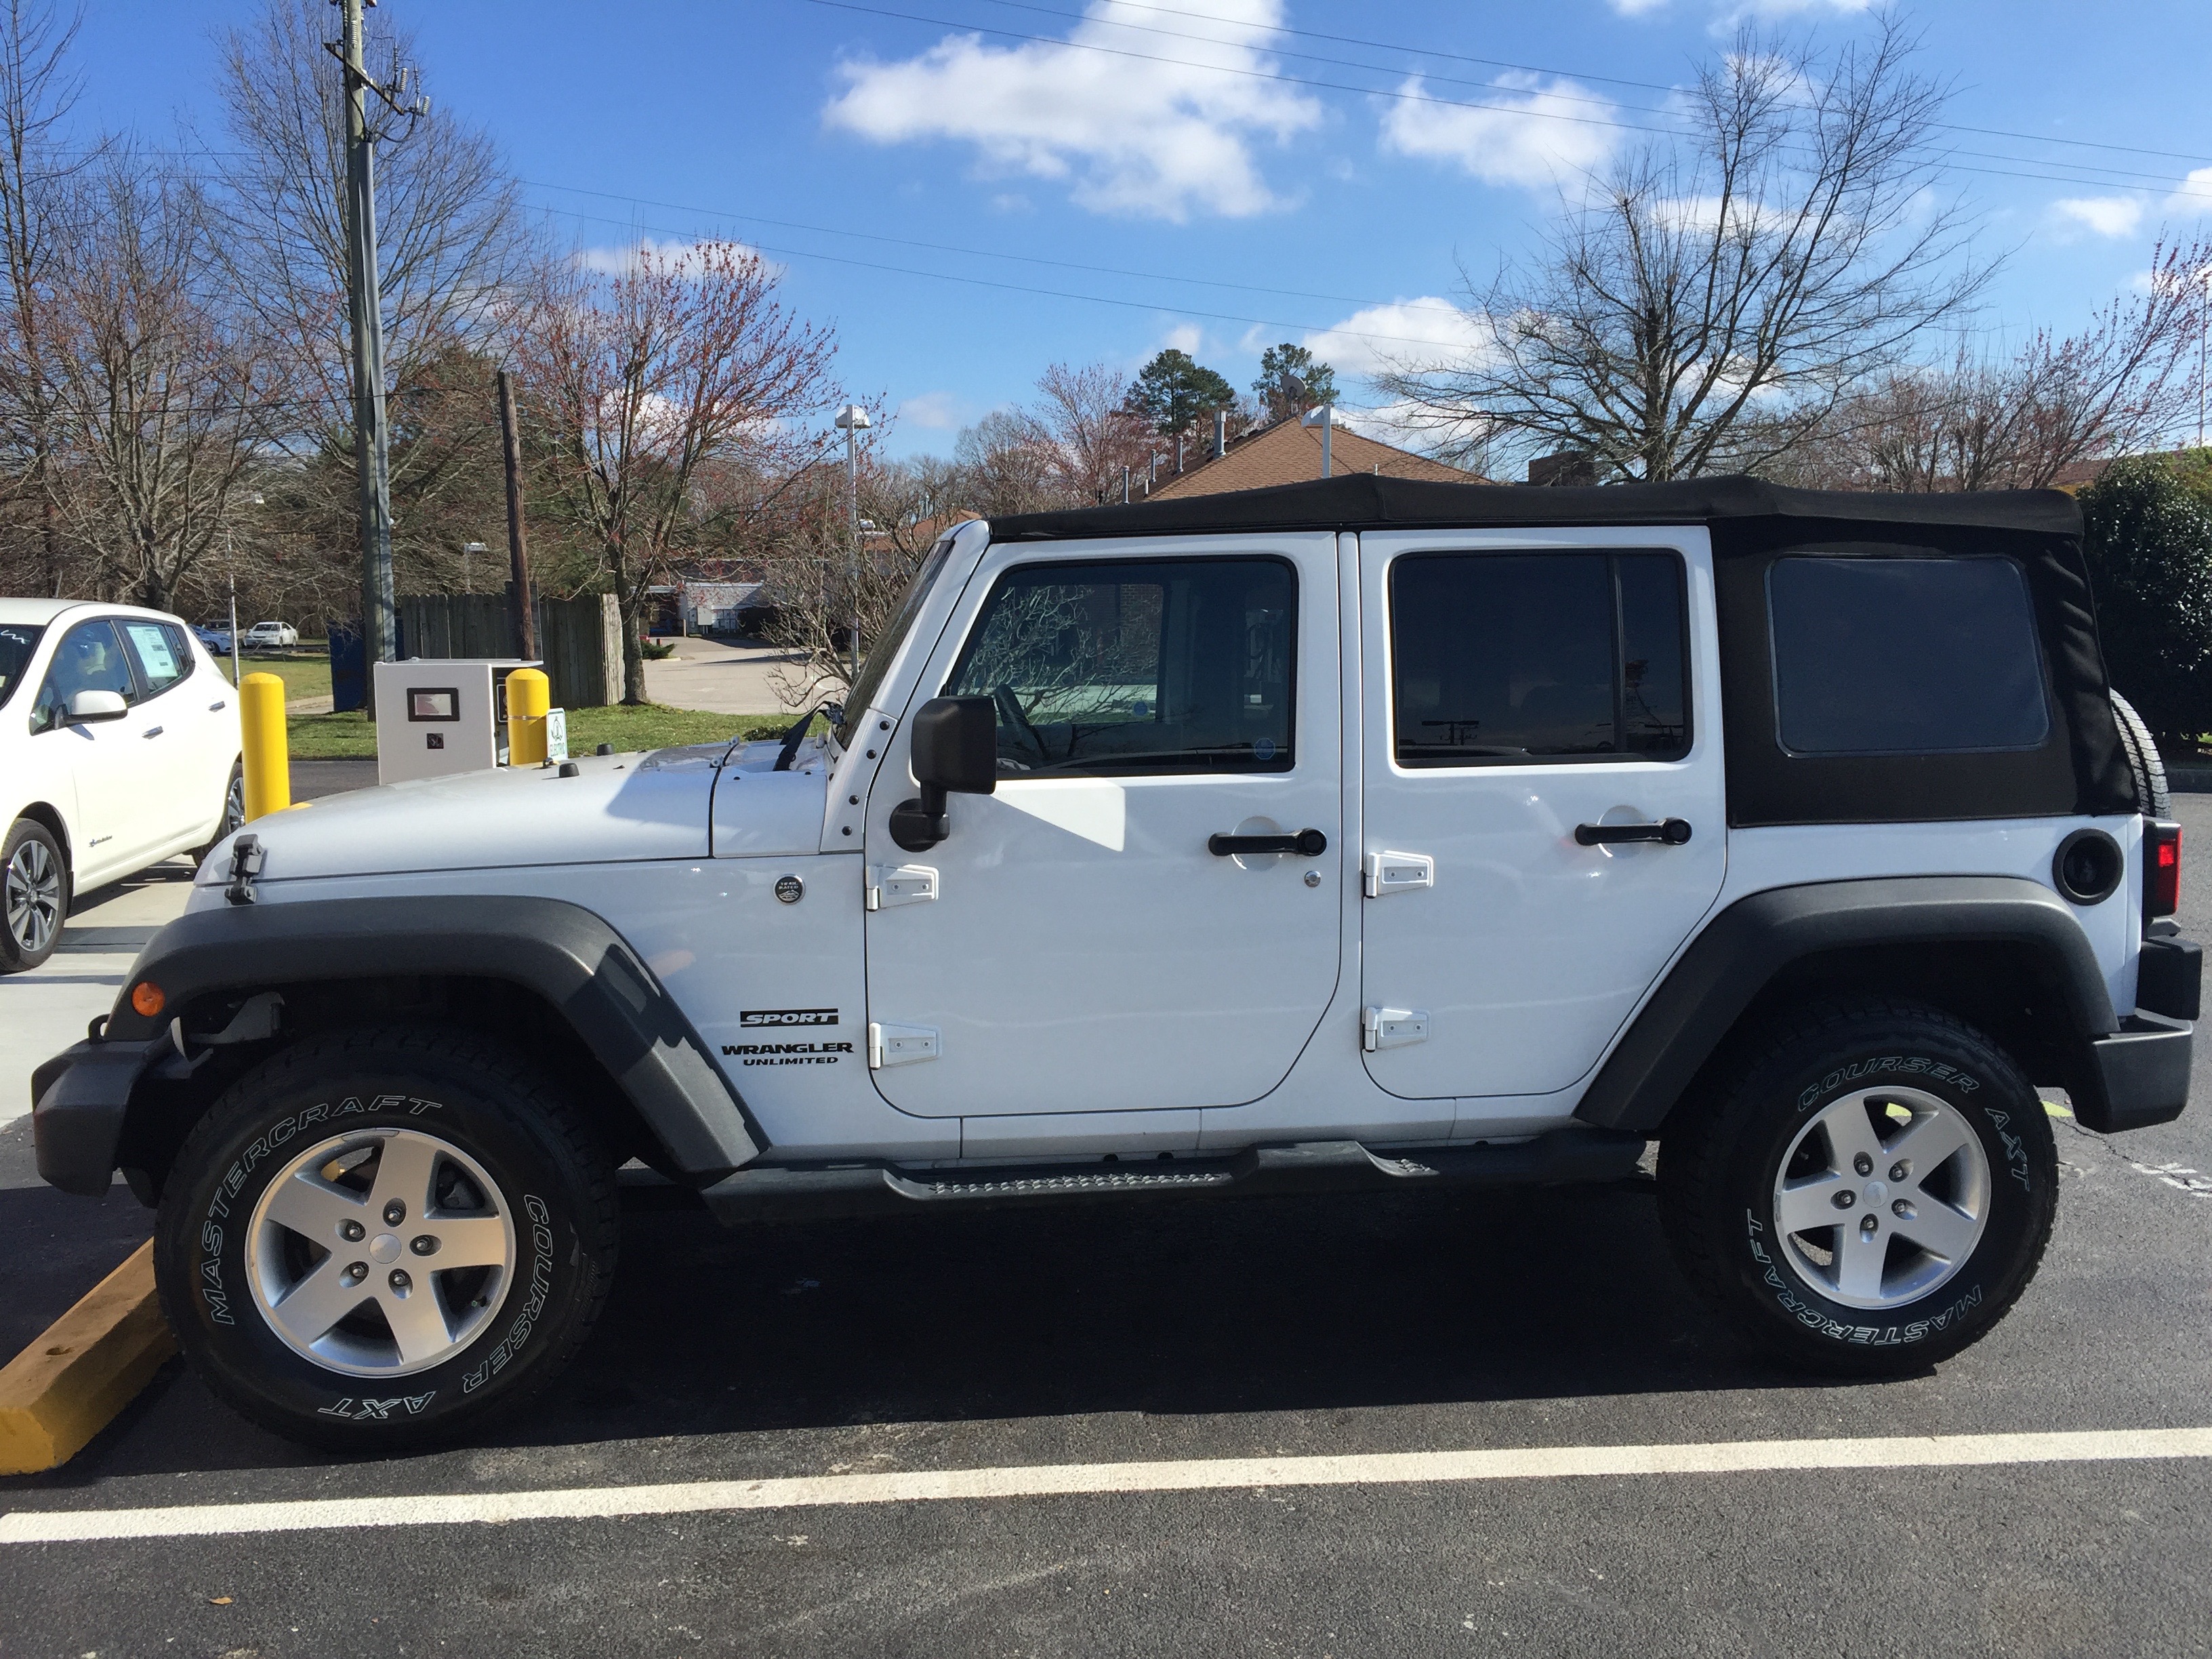 rod holder -  - The top destination for Jeep JK and JL Wrangler  news, rumors, and discussion